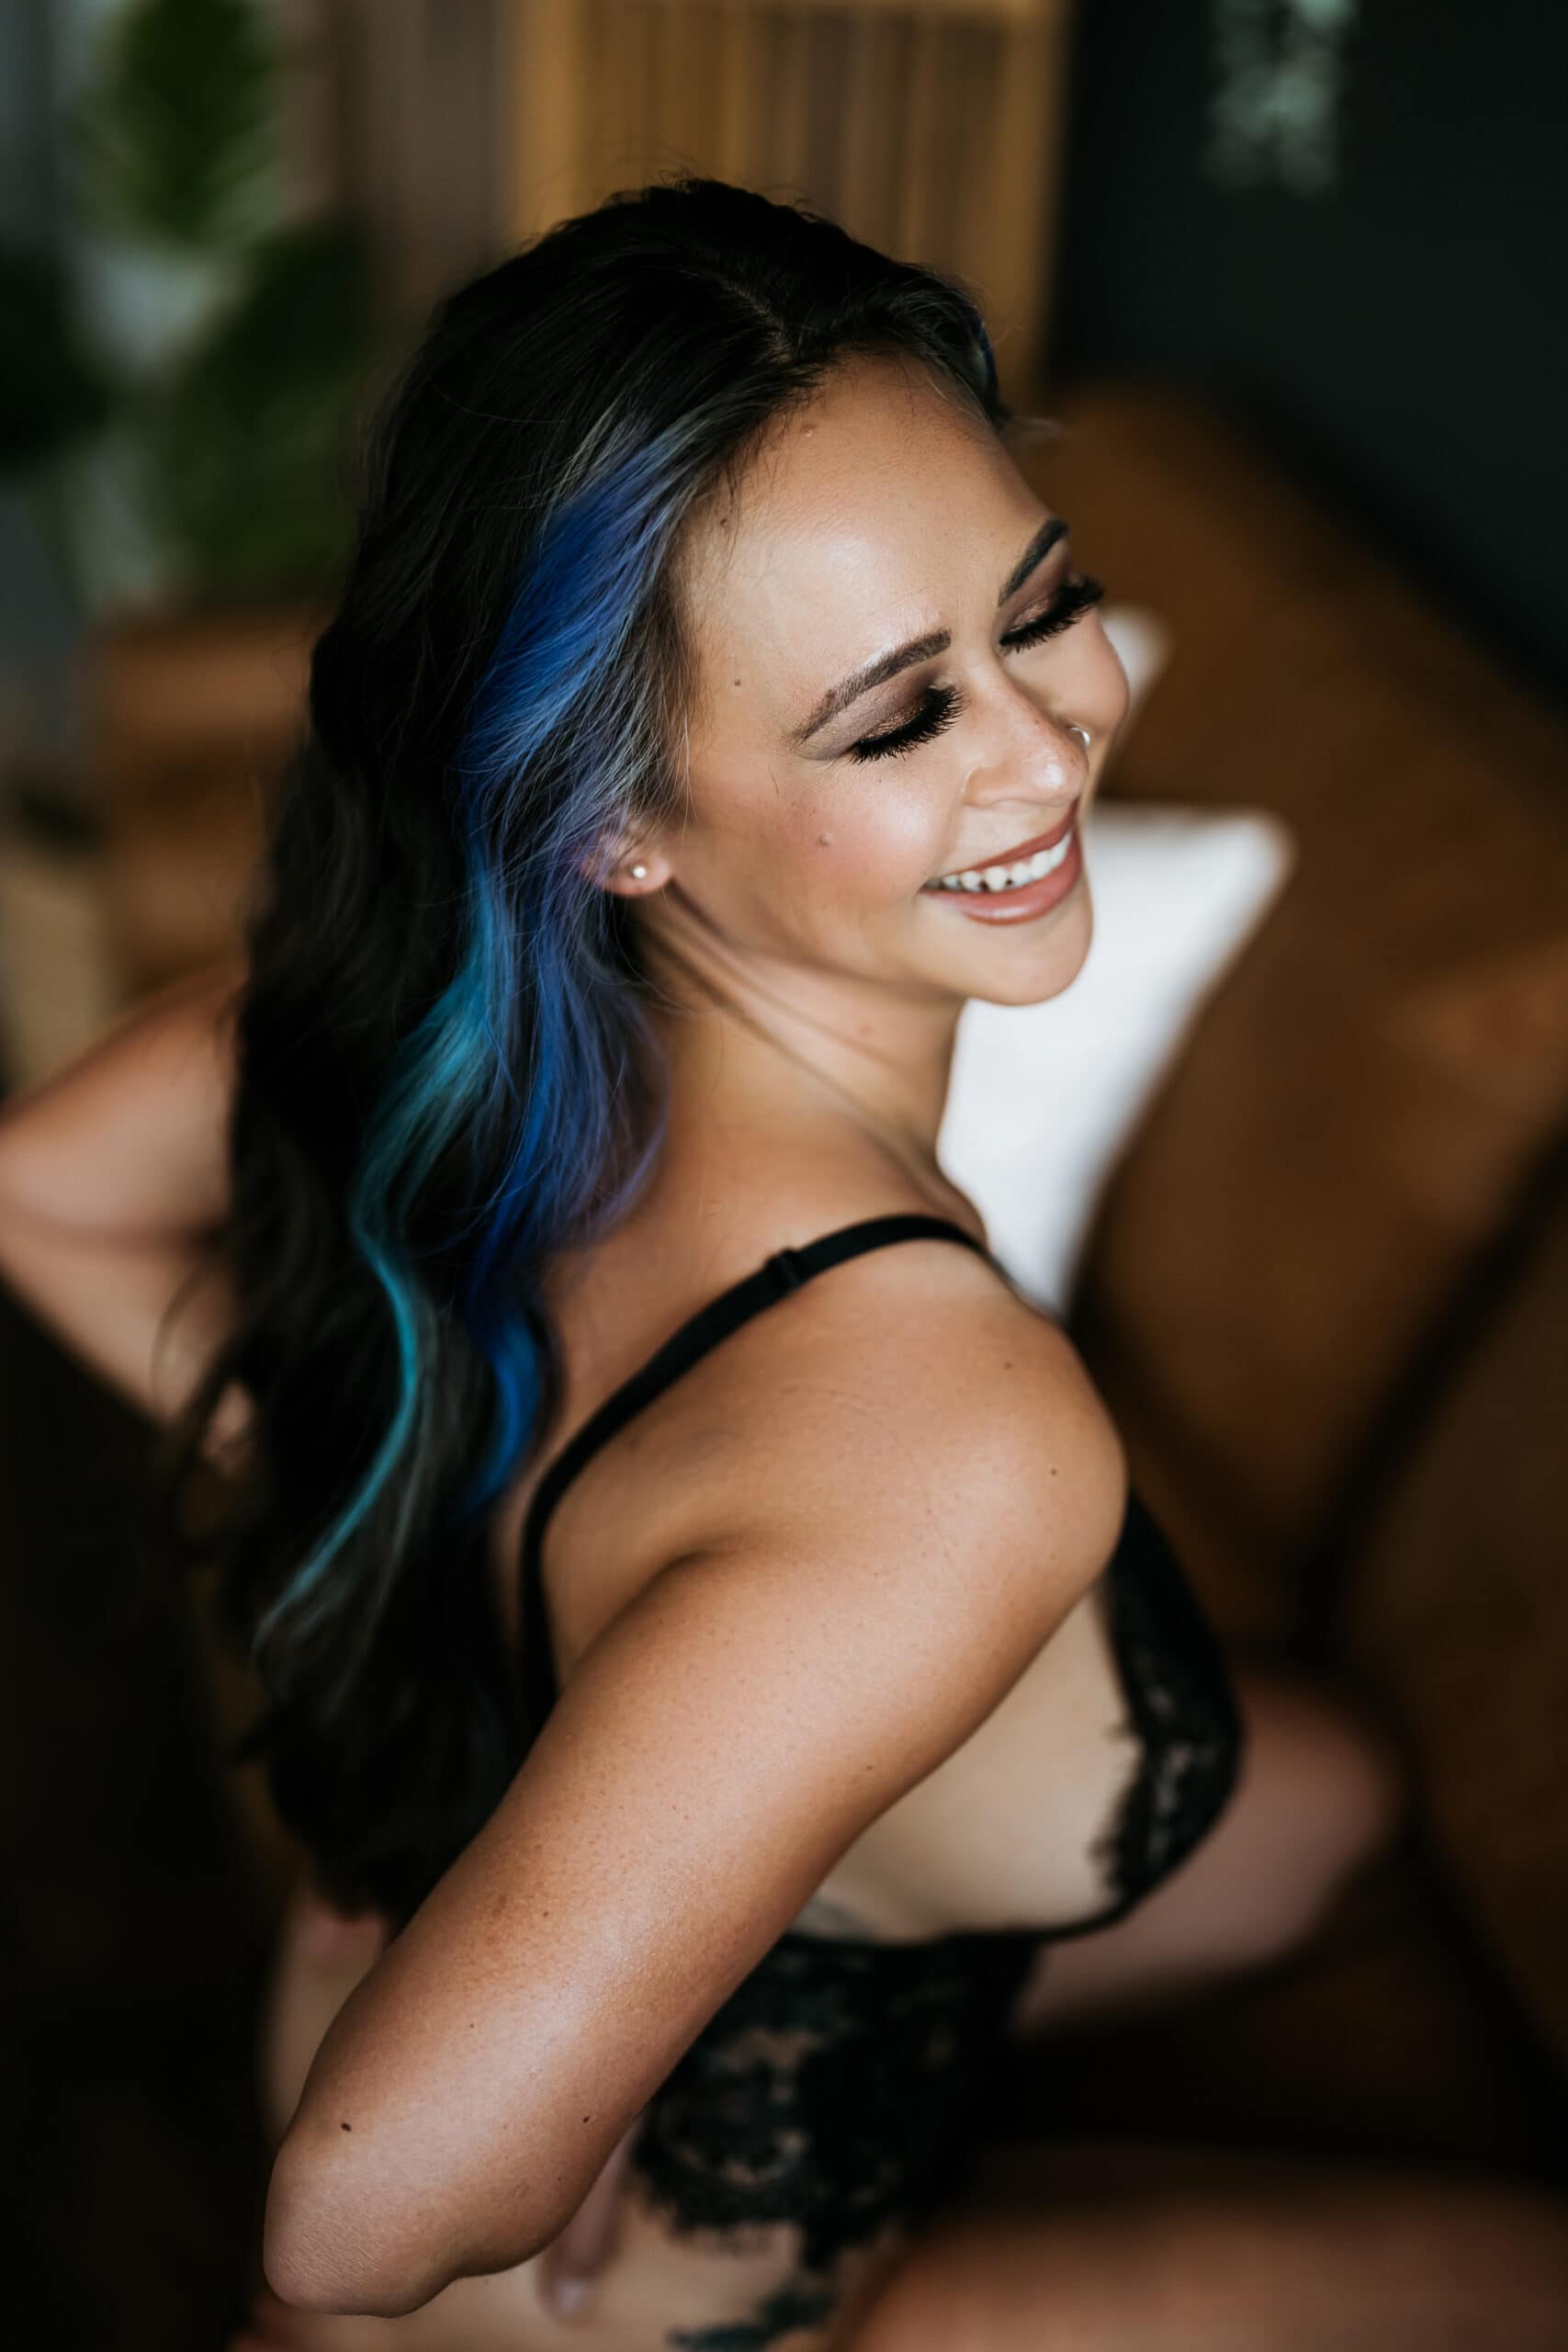 Woman smiling with blue hair streak and hands on waist. Picture by Katie O'Docharty, Denver Boudoir Photographer